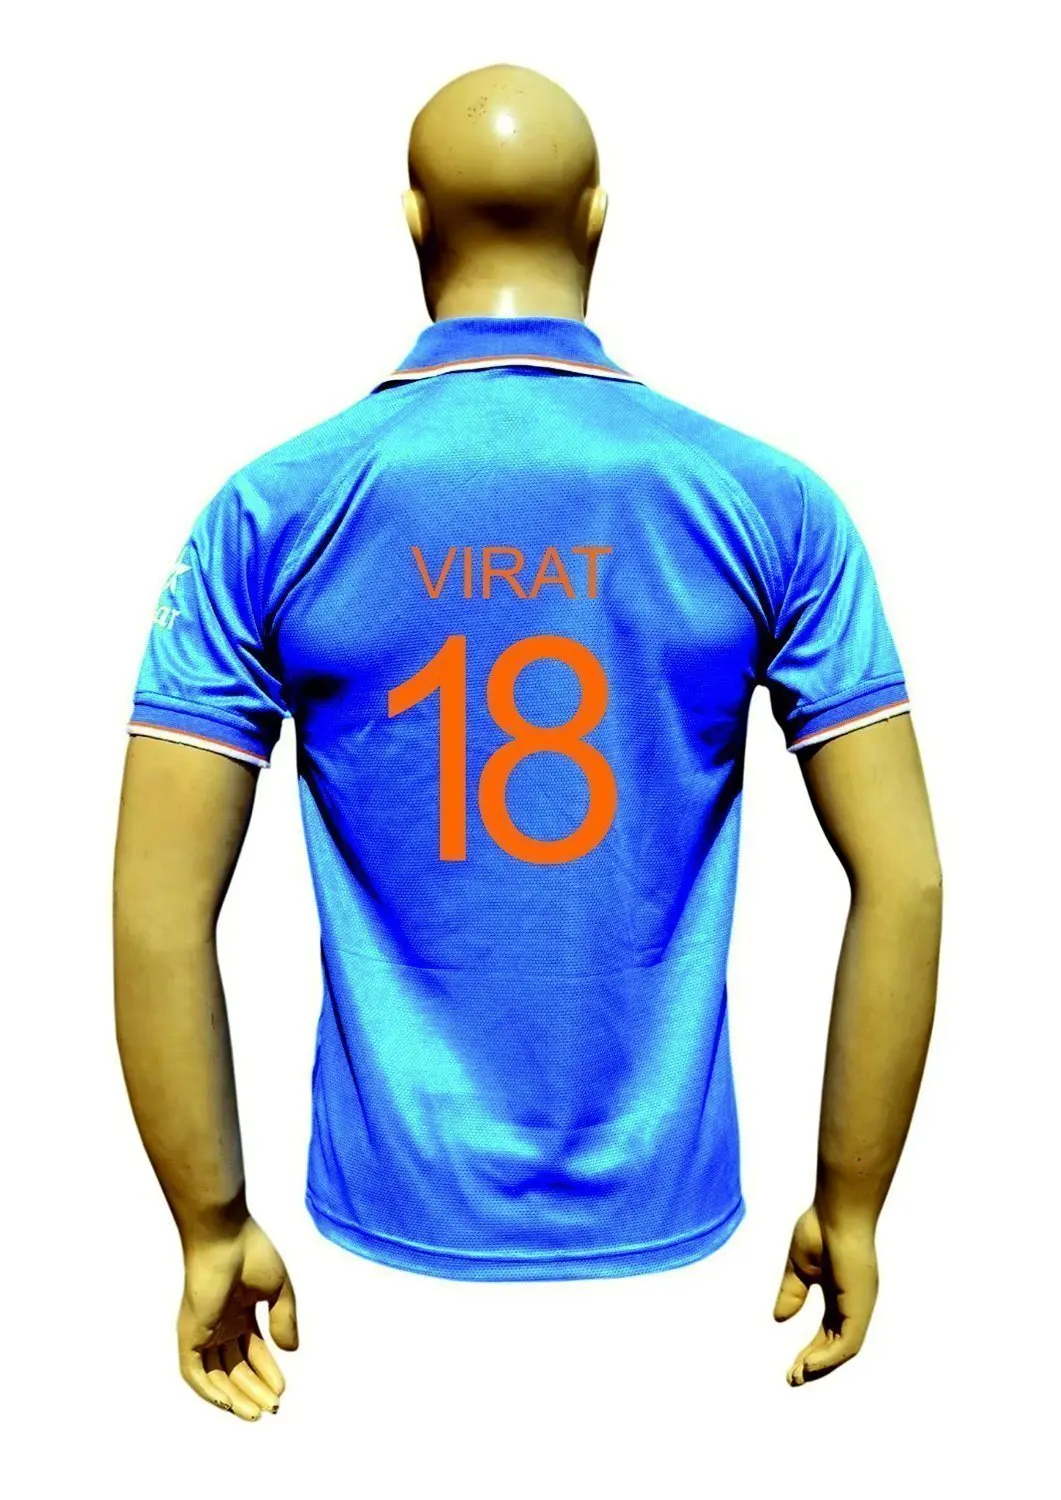 buy new indian jersey